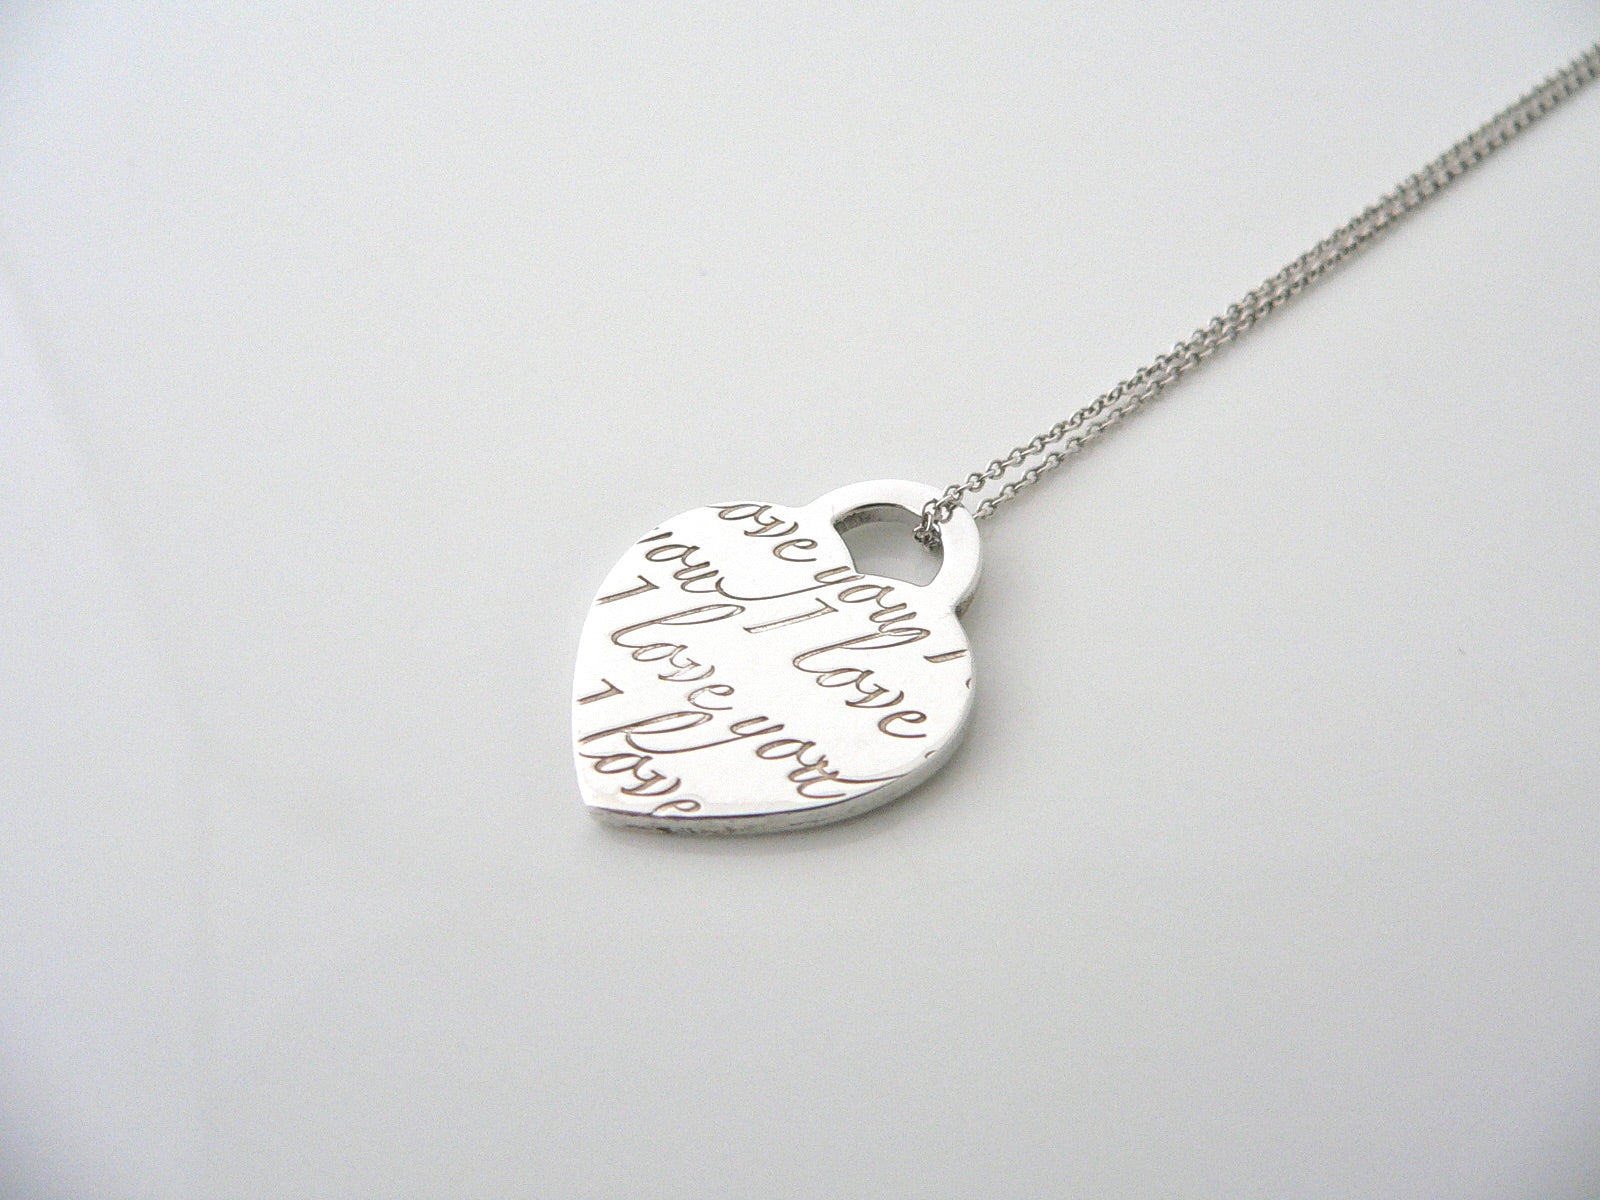 I'm Sorry - I Love You - Forever Love Necklace | JustFamilyThings